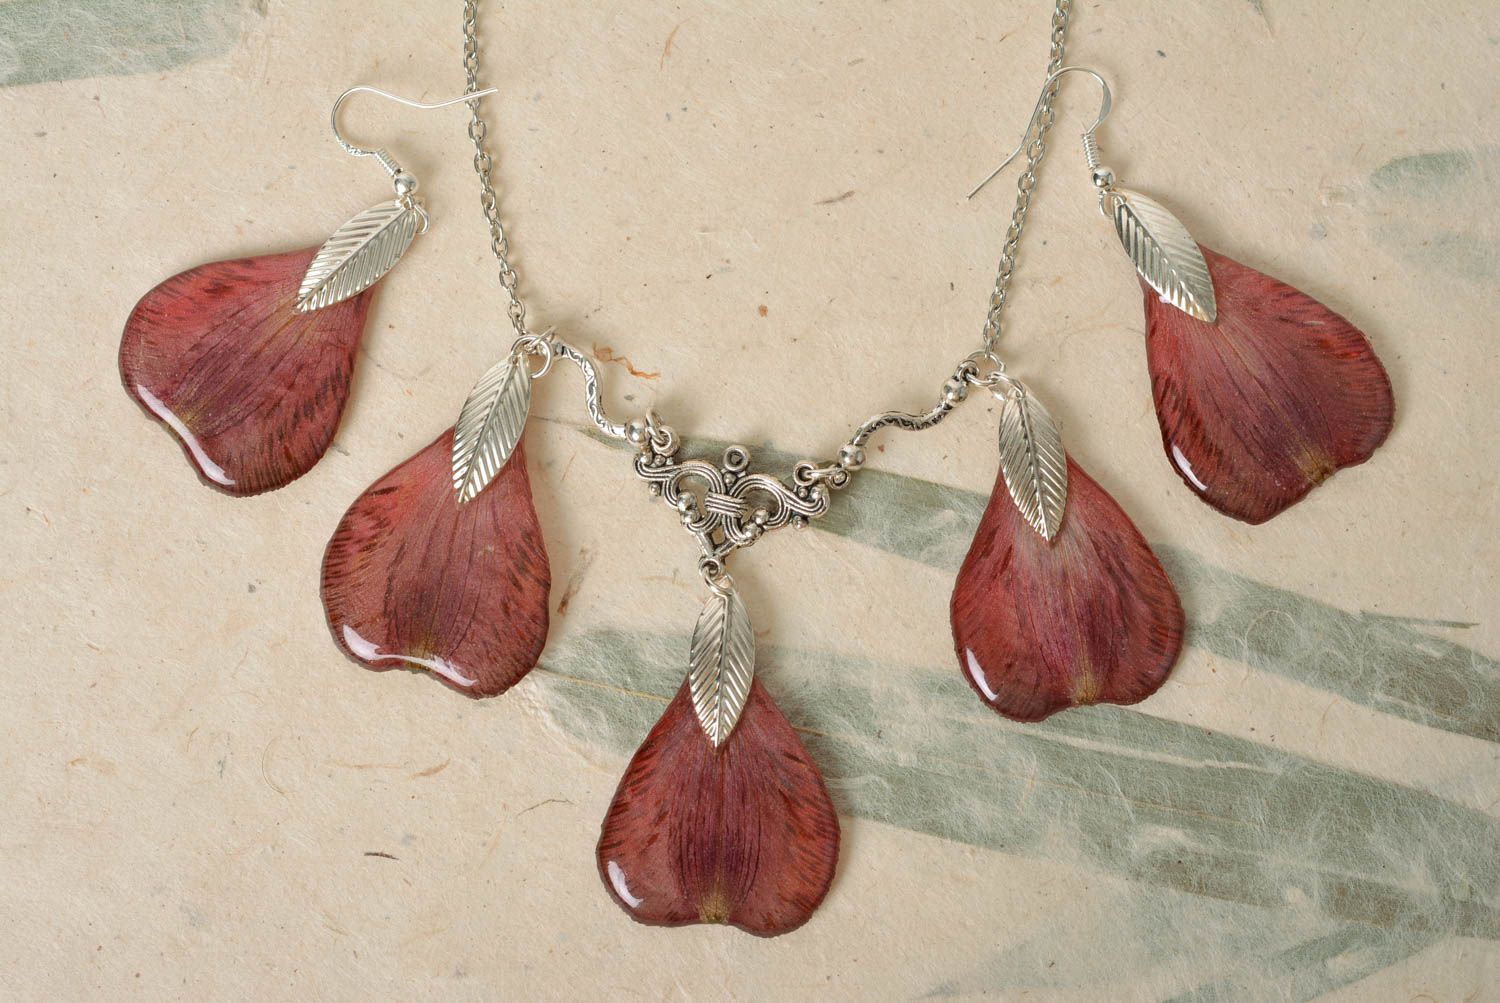 Handmade necklace and earrings with dried flowers coated with epoxy jewelry set photo 4